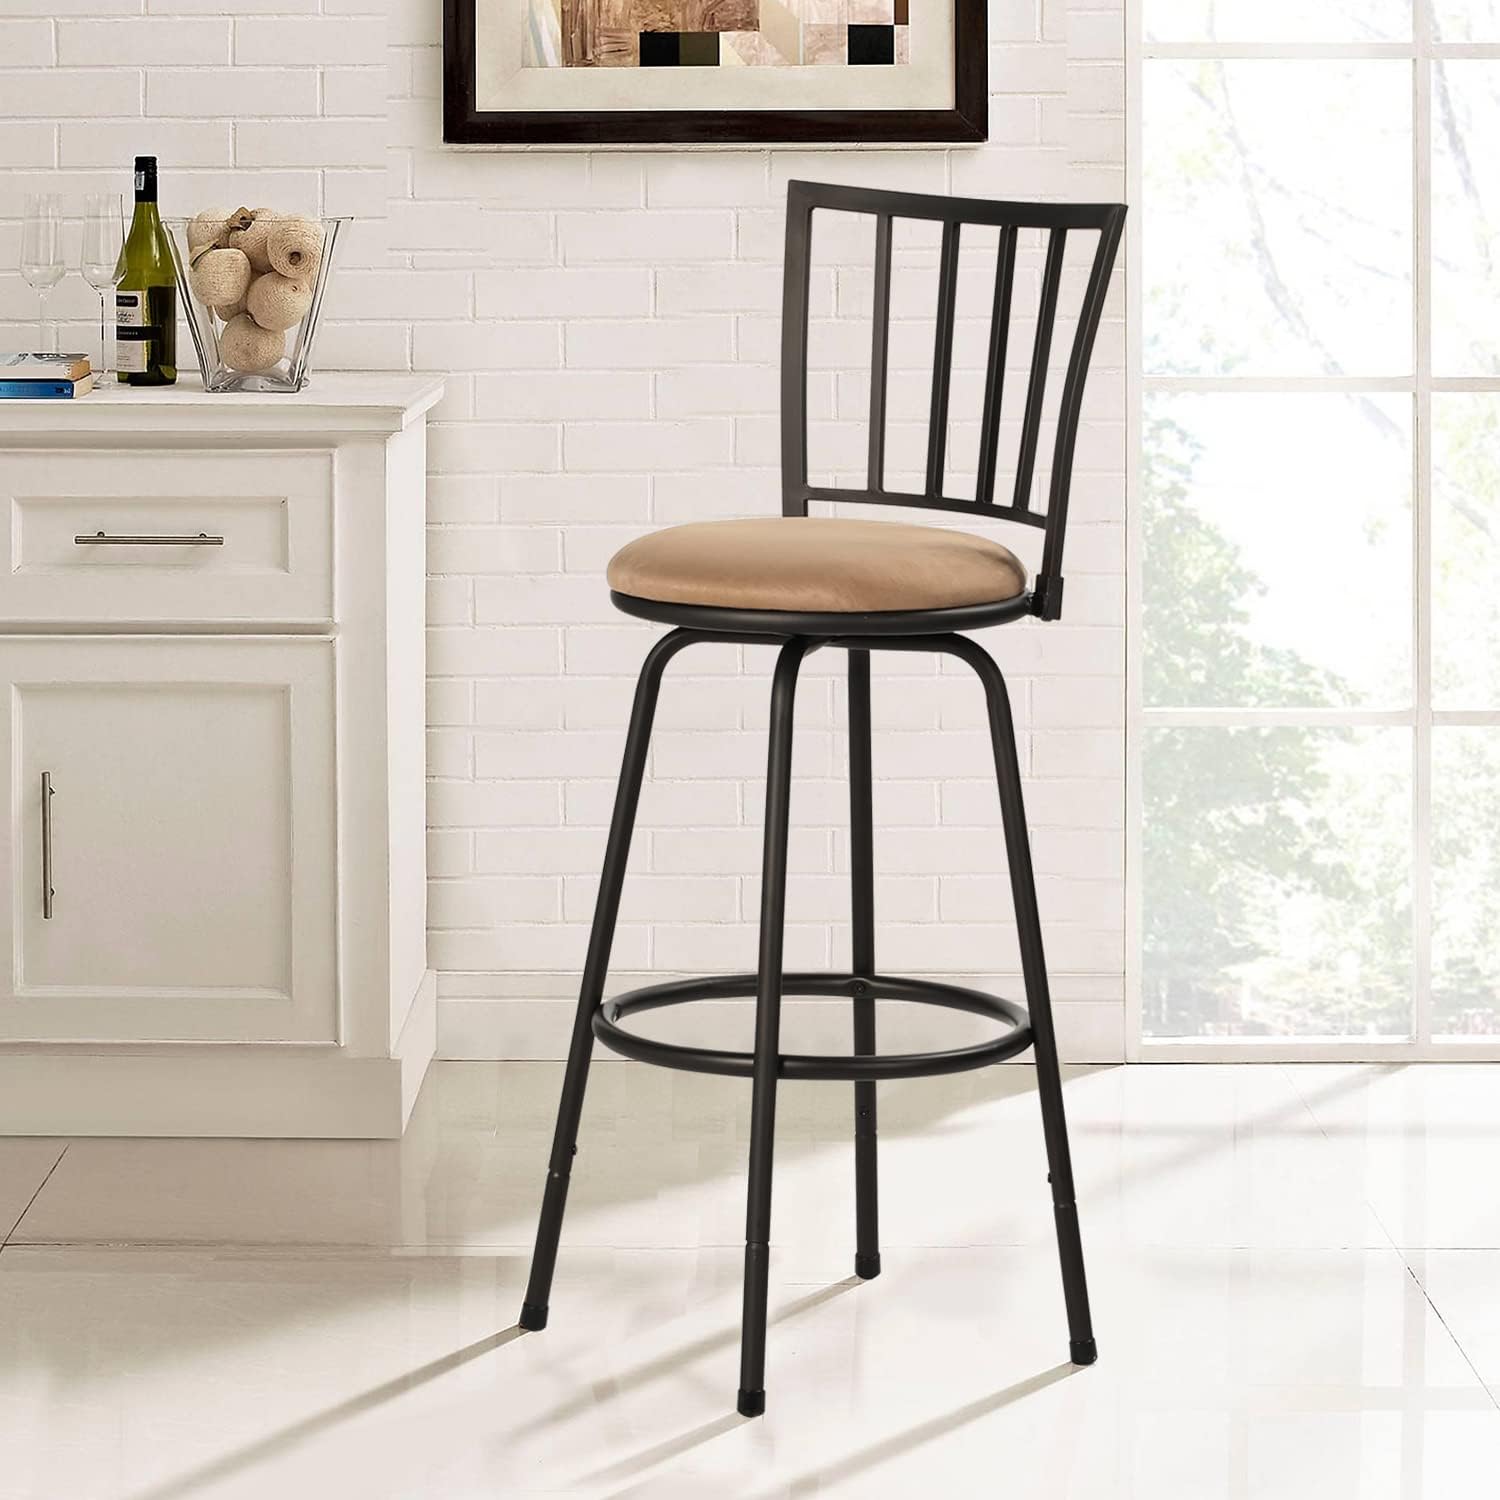 VECELO 41.5" Adjustable Bar Stools with 360 Degree Swivel Seat Top Set of 2